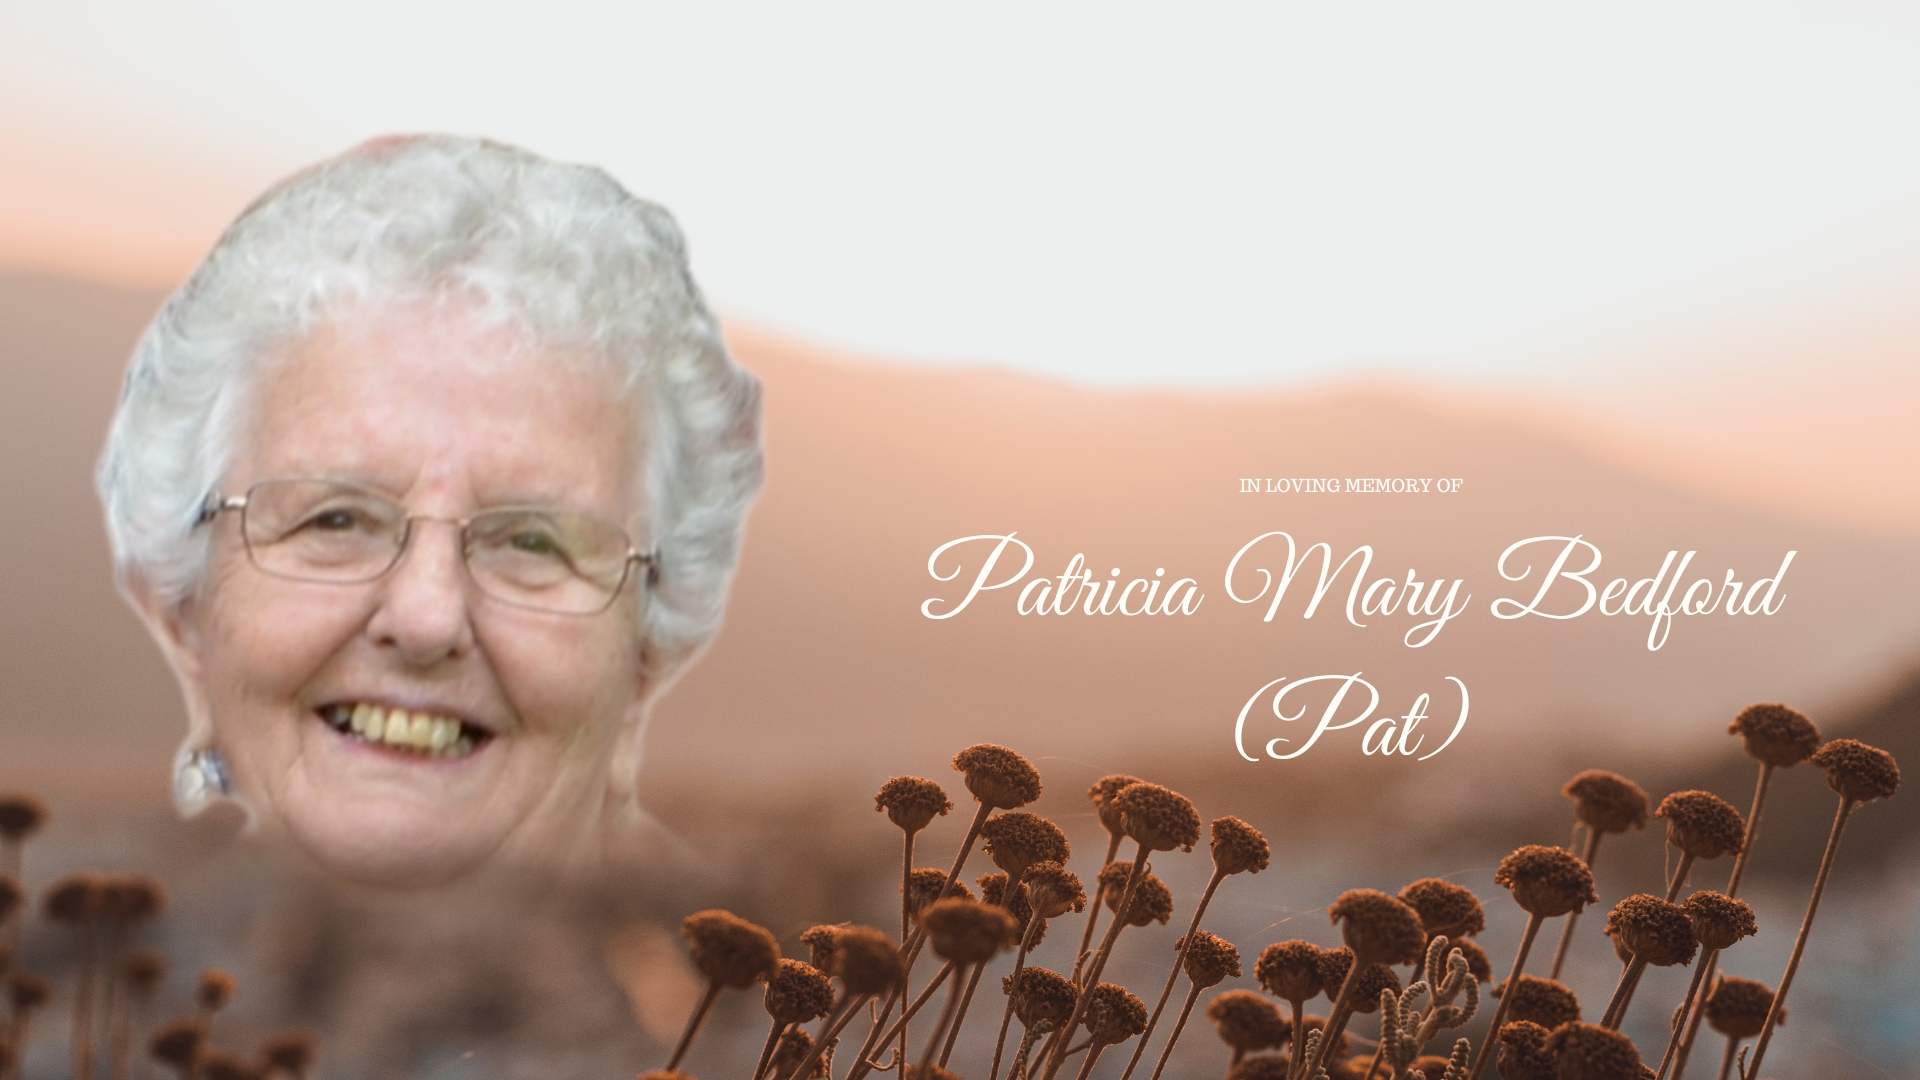 Patricia Mary Bedford 'Pat'